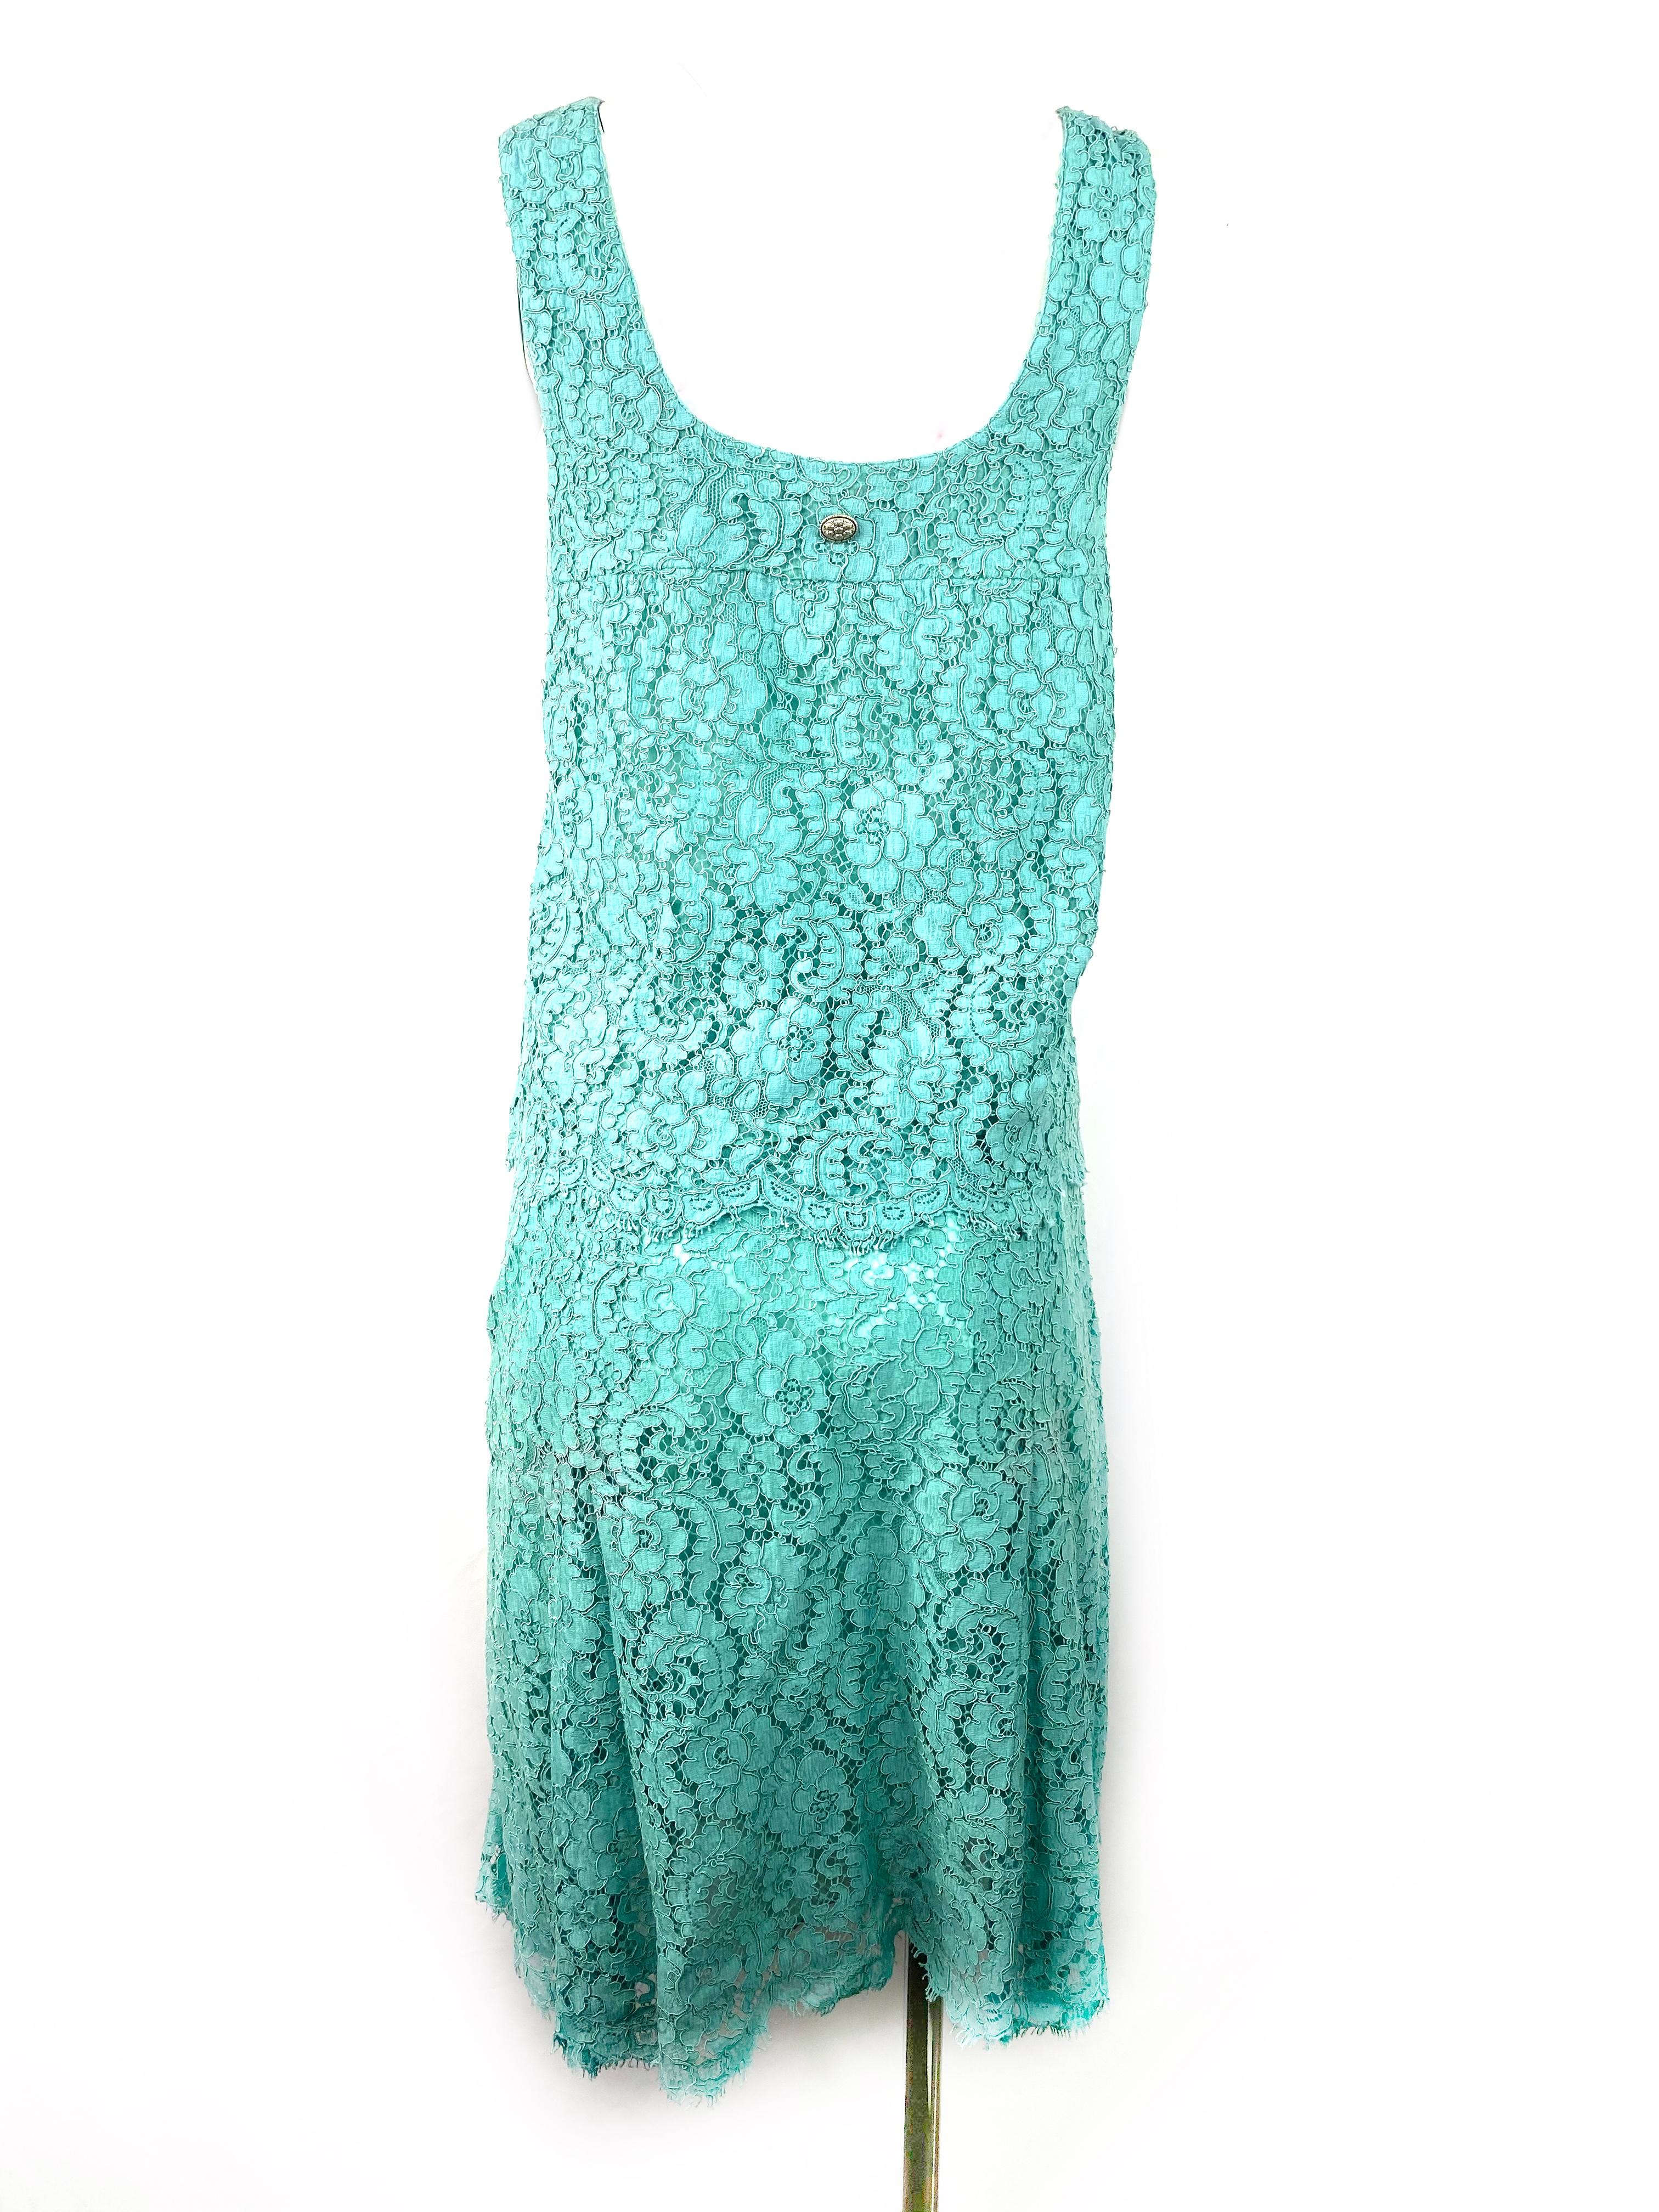 Chanel Turquoise Floral Lace Top and Skirt Set Size 40 In Excellent Condition For Sale In Beverly Hills, CA